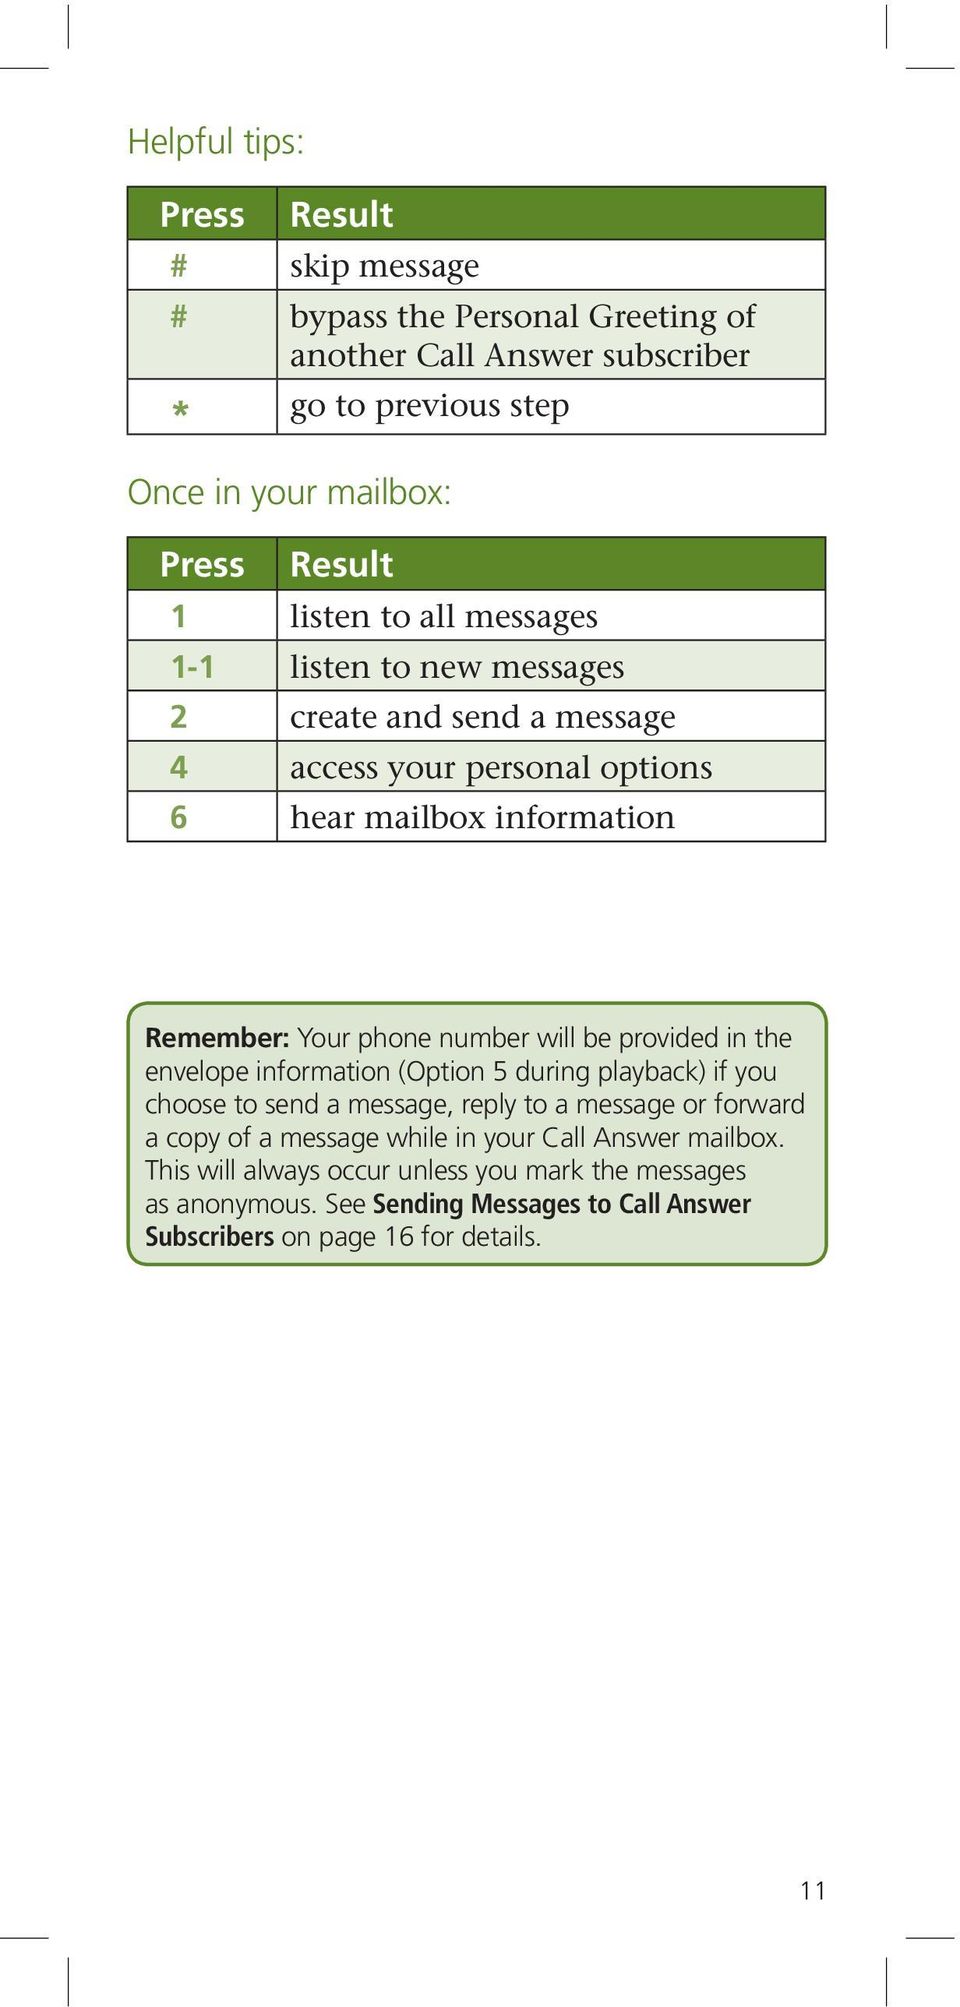 number will be provided in the envelope information (Option 5 during playback) if you choose to send a message, reply to a message or forward a copy of a message